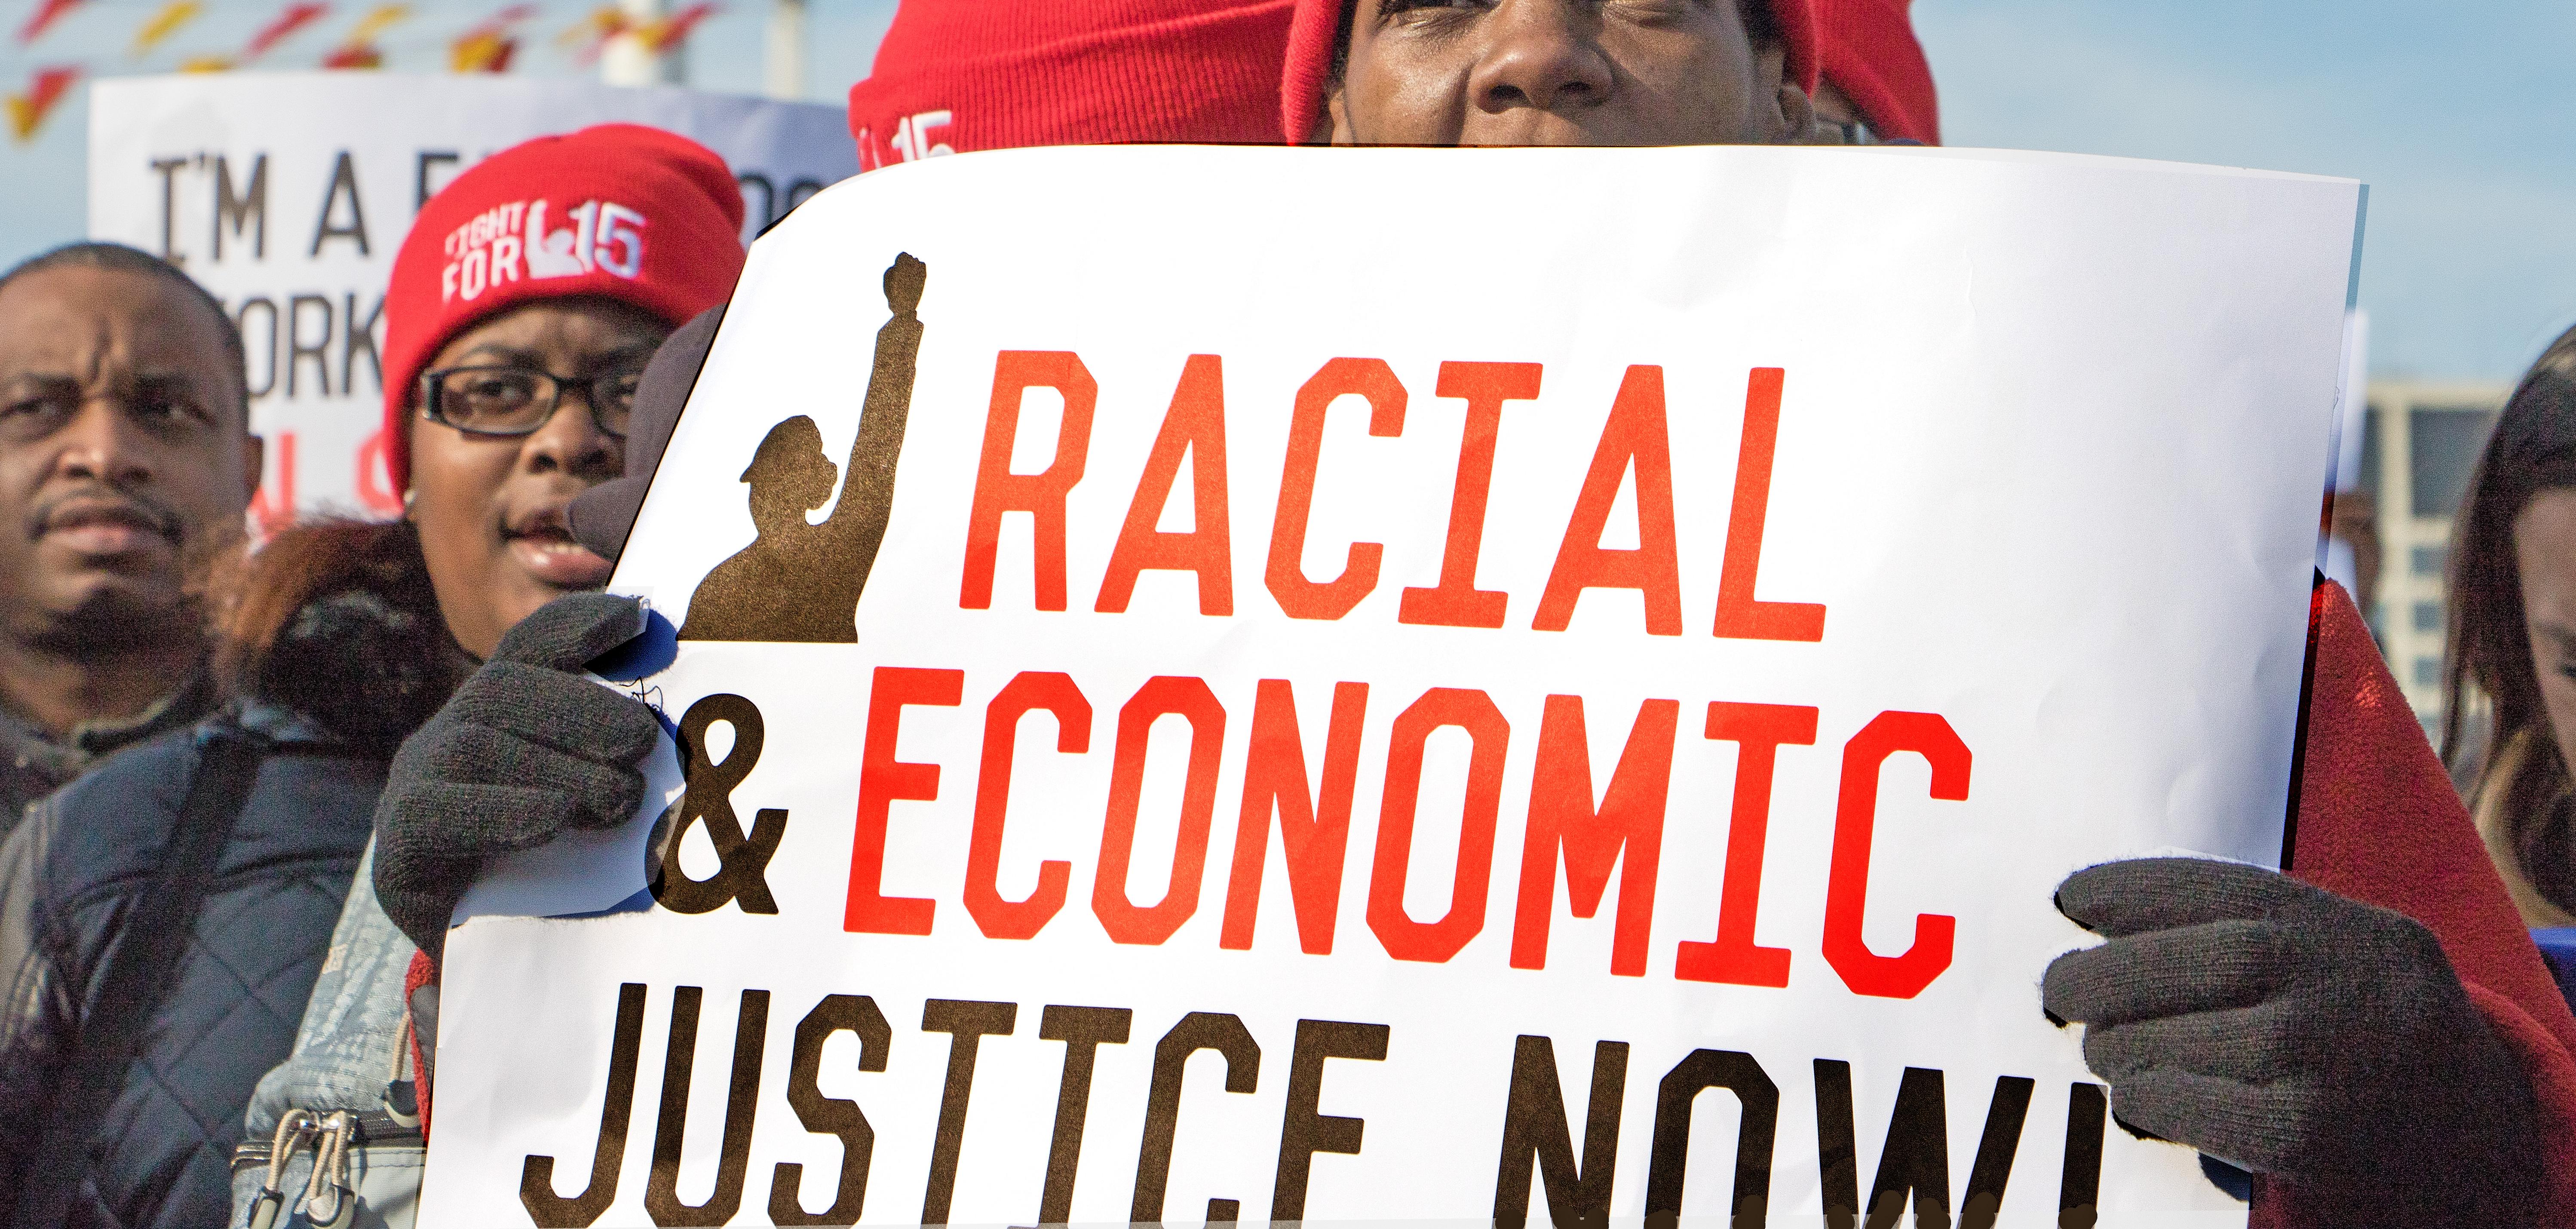 Woman in hat and gloves holds sign reading "Racial Economic Justice Now."